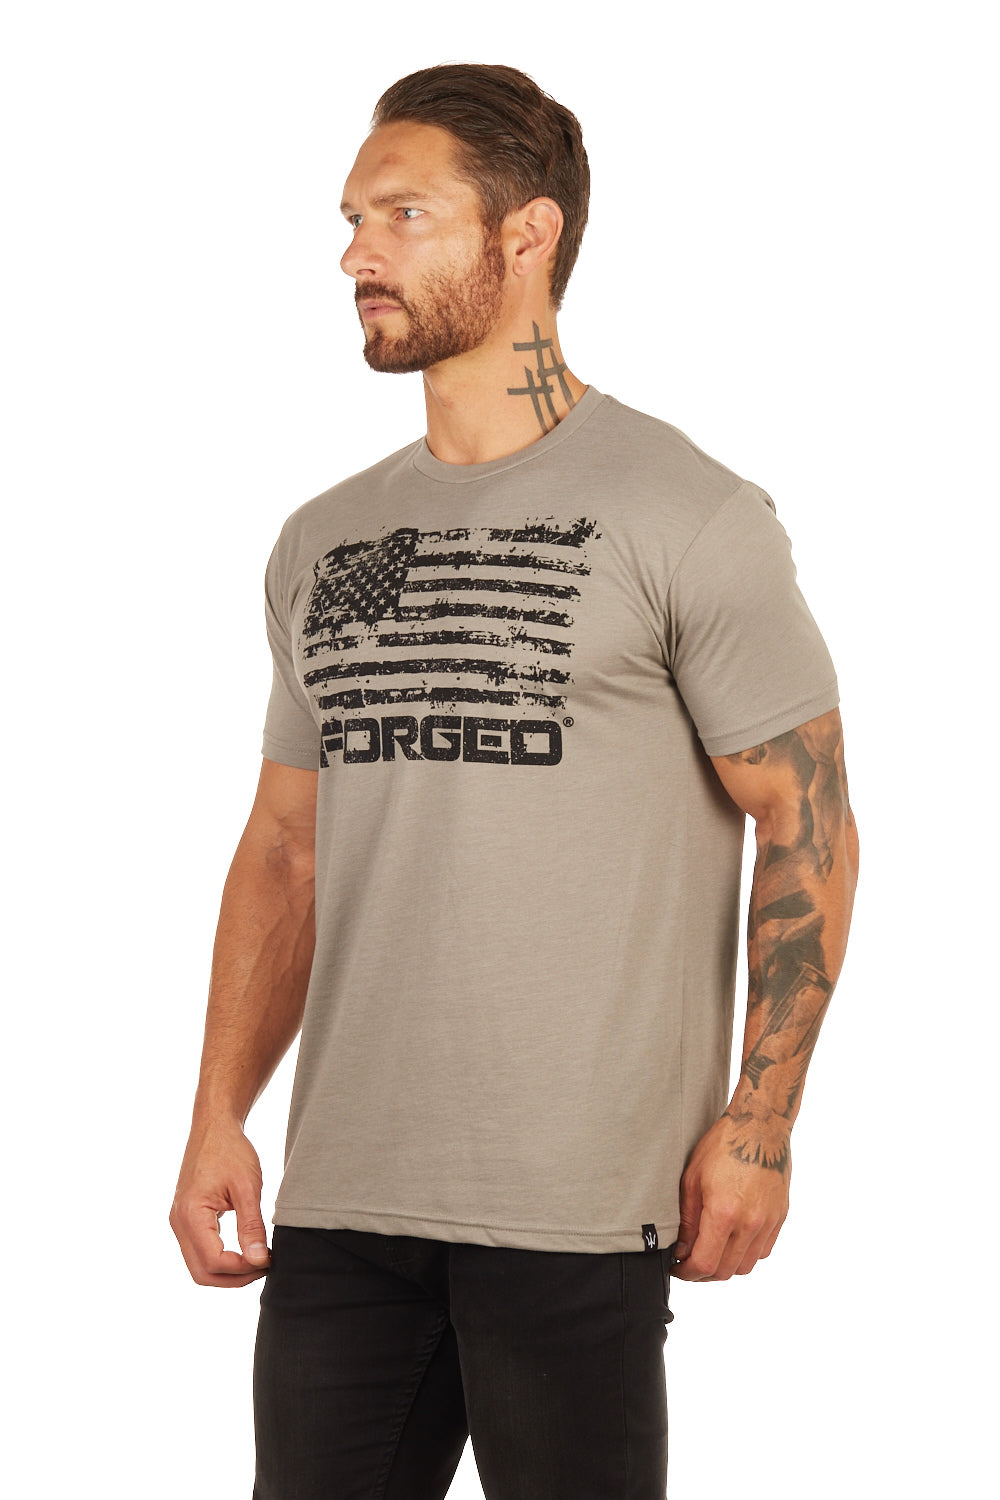 PATRIOT – Forged®